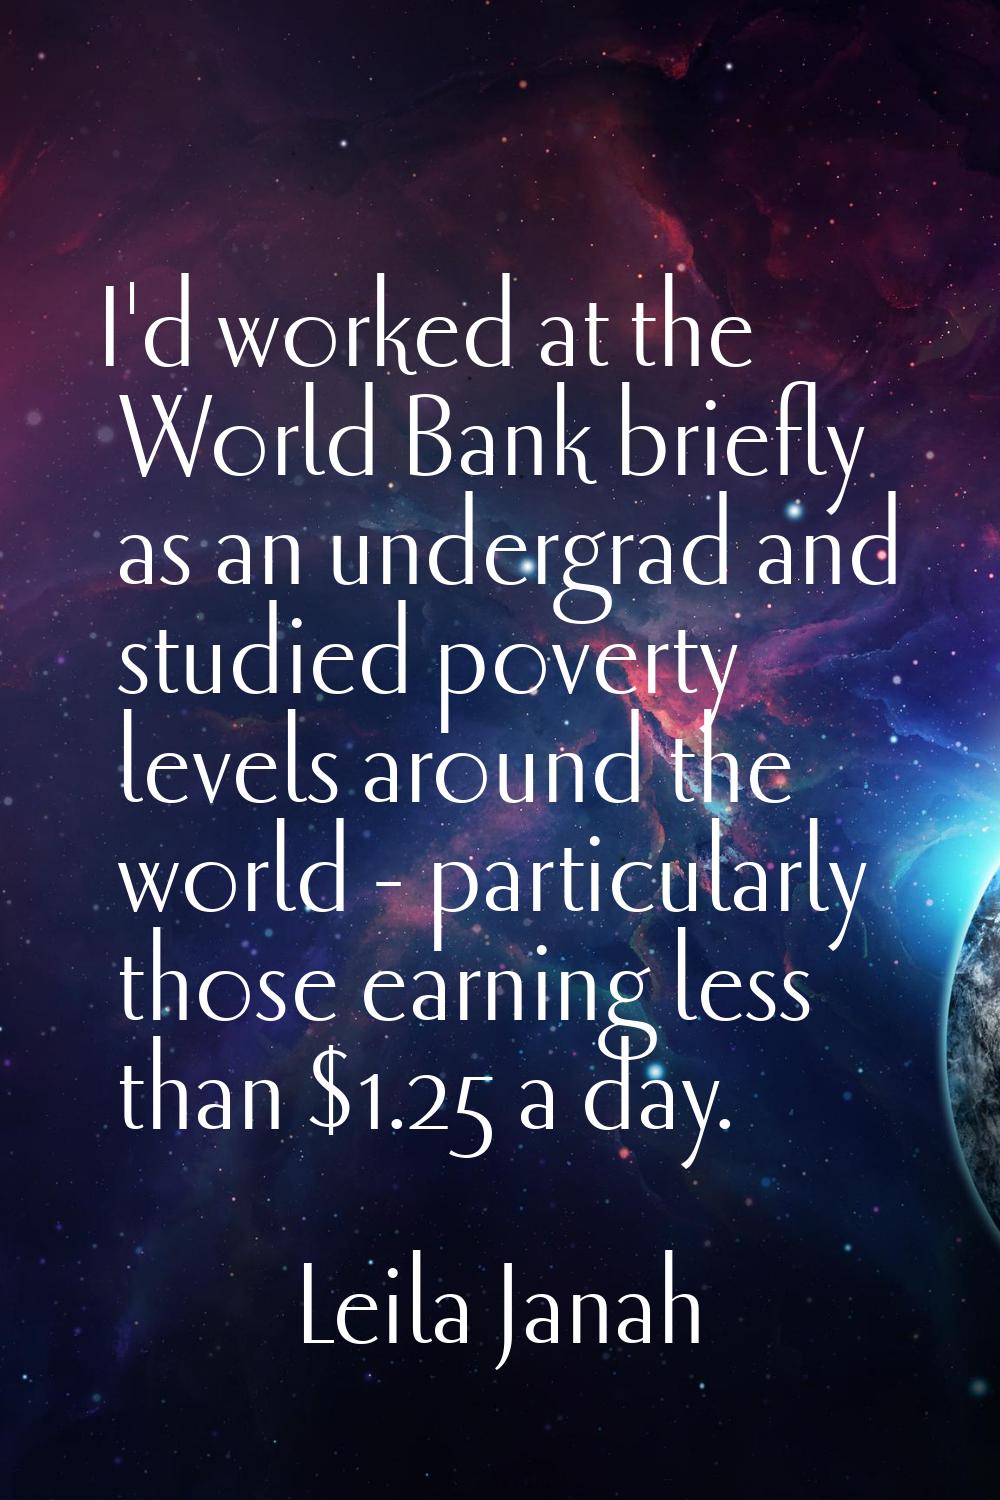 I'd worked at the World Bank briefly as an undergrad and studied poverty levels around the world - 